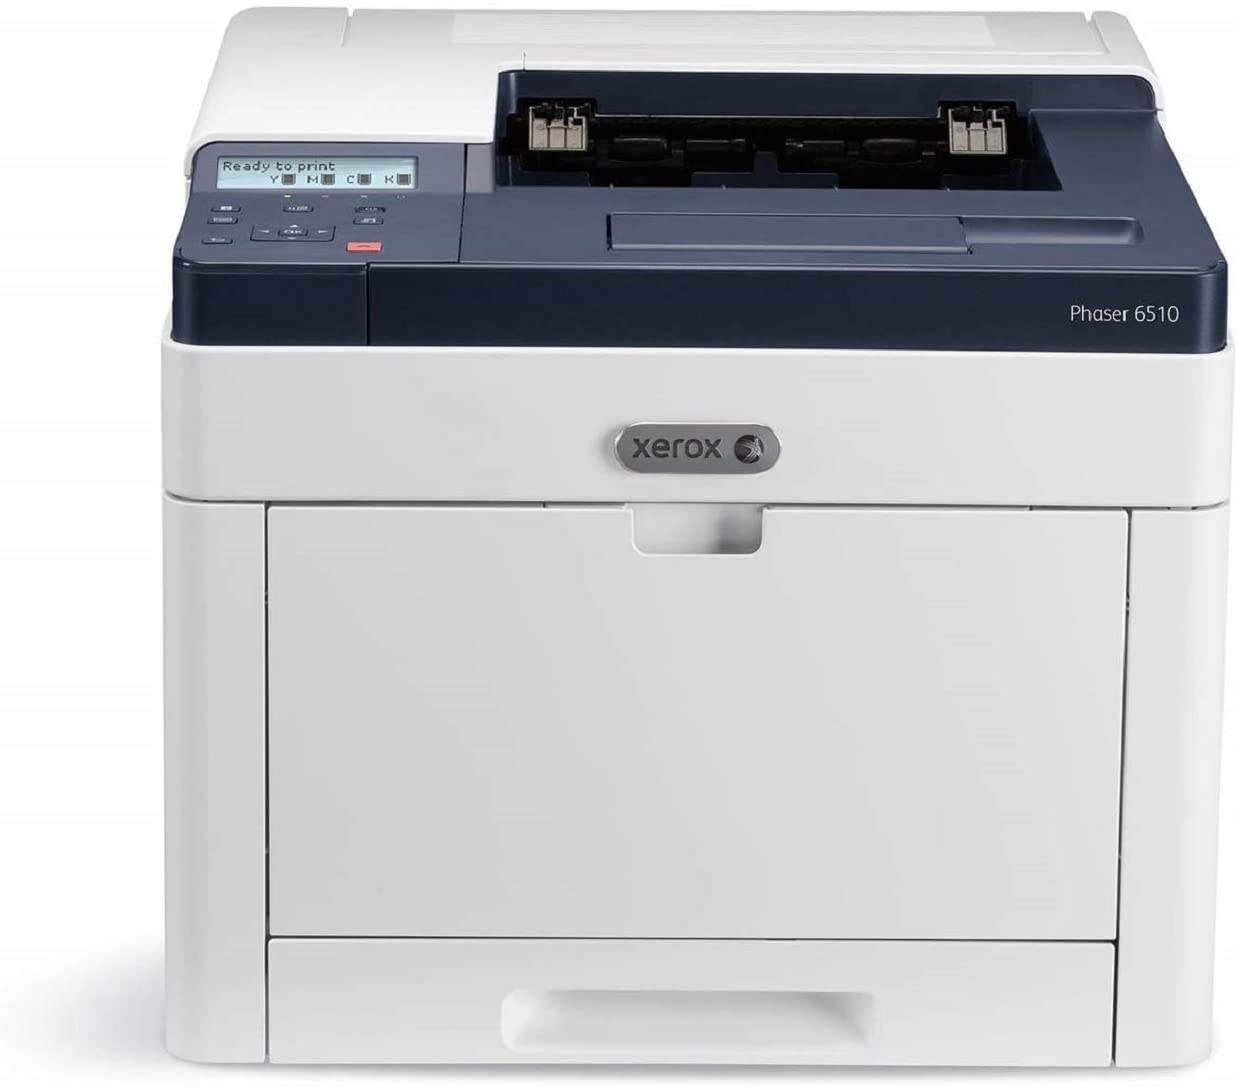  Xerox Phaser 6510dn A4 Colour LED , Laser Printer with Duplex 2-Sided Printing uk reviews